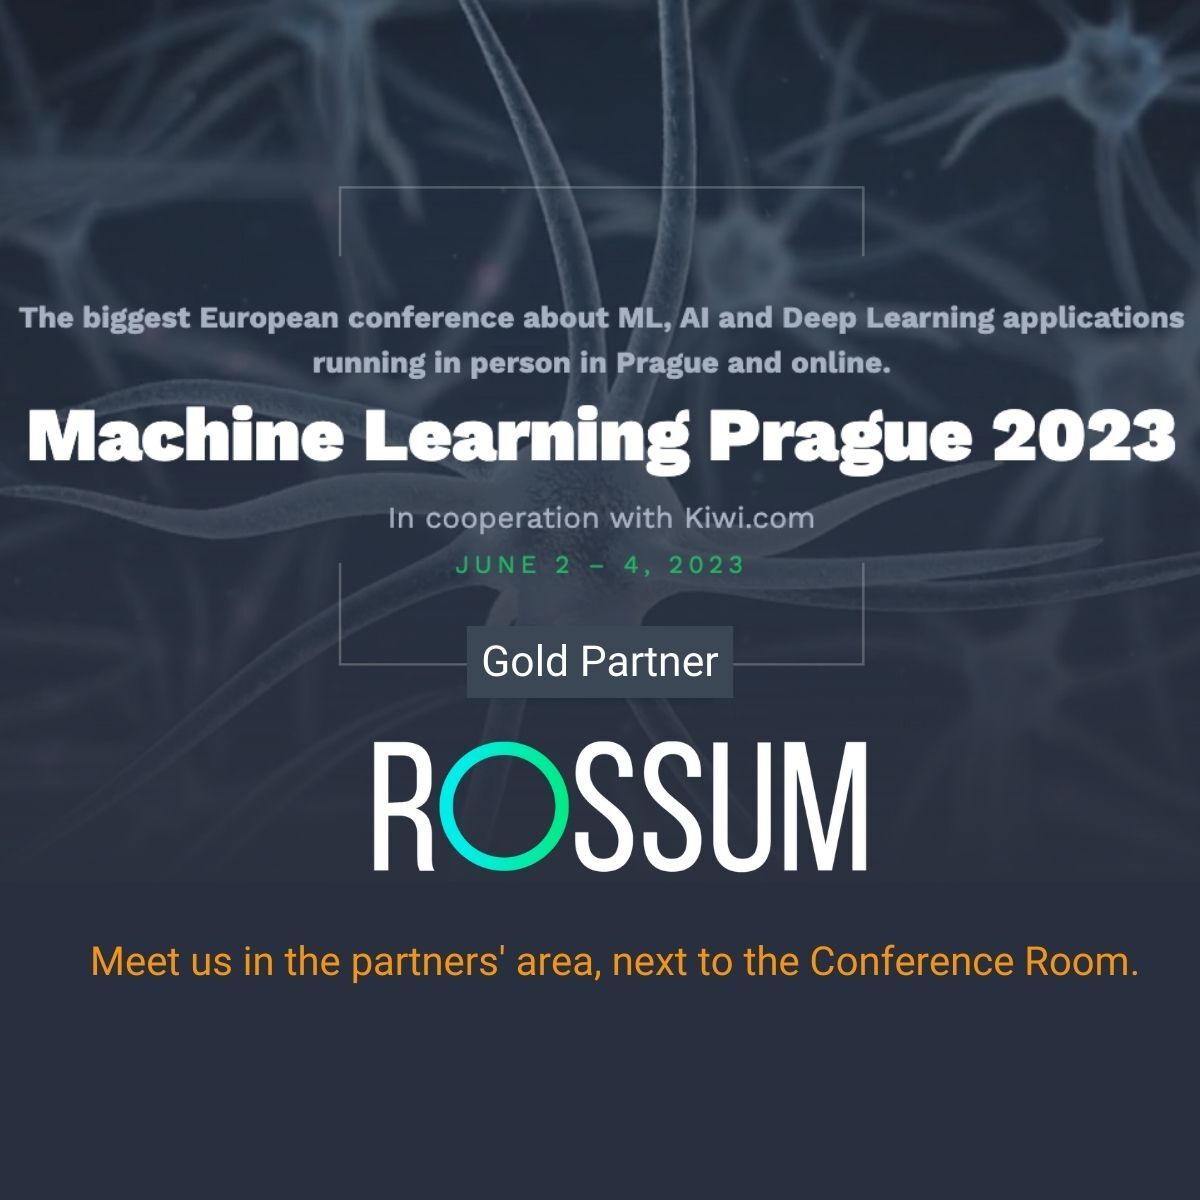 We're a Gold Partner of @MLPrague 2023 - June 2 to 4. The biggest European conference about machine learning, AI, and deep learning applications.

We'll have top engineers at the event, and a booth in the partners area. Sign up here... mlprague.com

#MLPrague #AI #ML